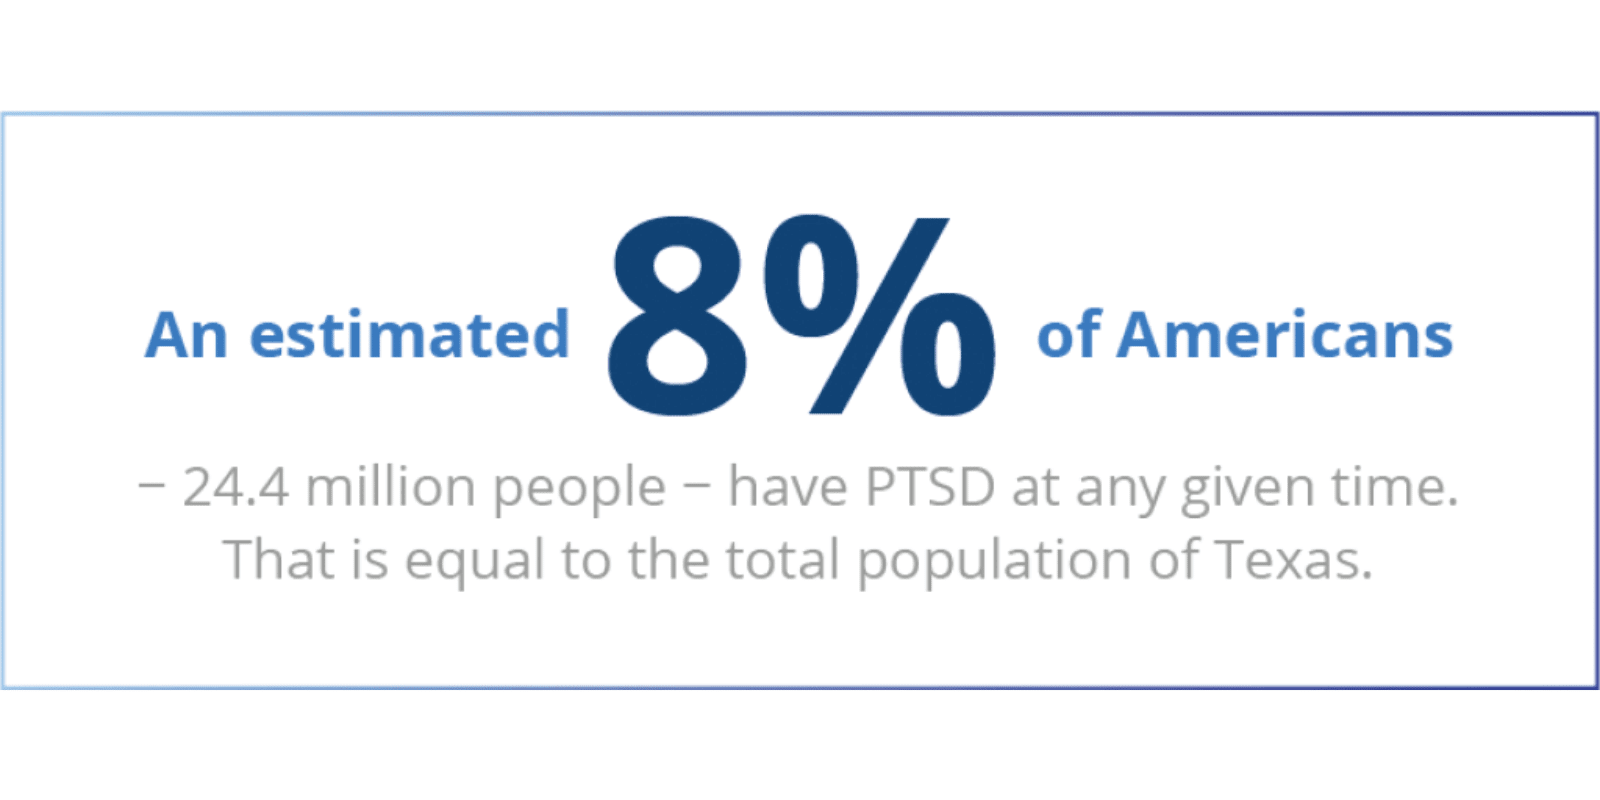 An estimated 8% of Americans have PTSD at any given time. This is equal to the total population of Texas